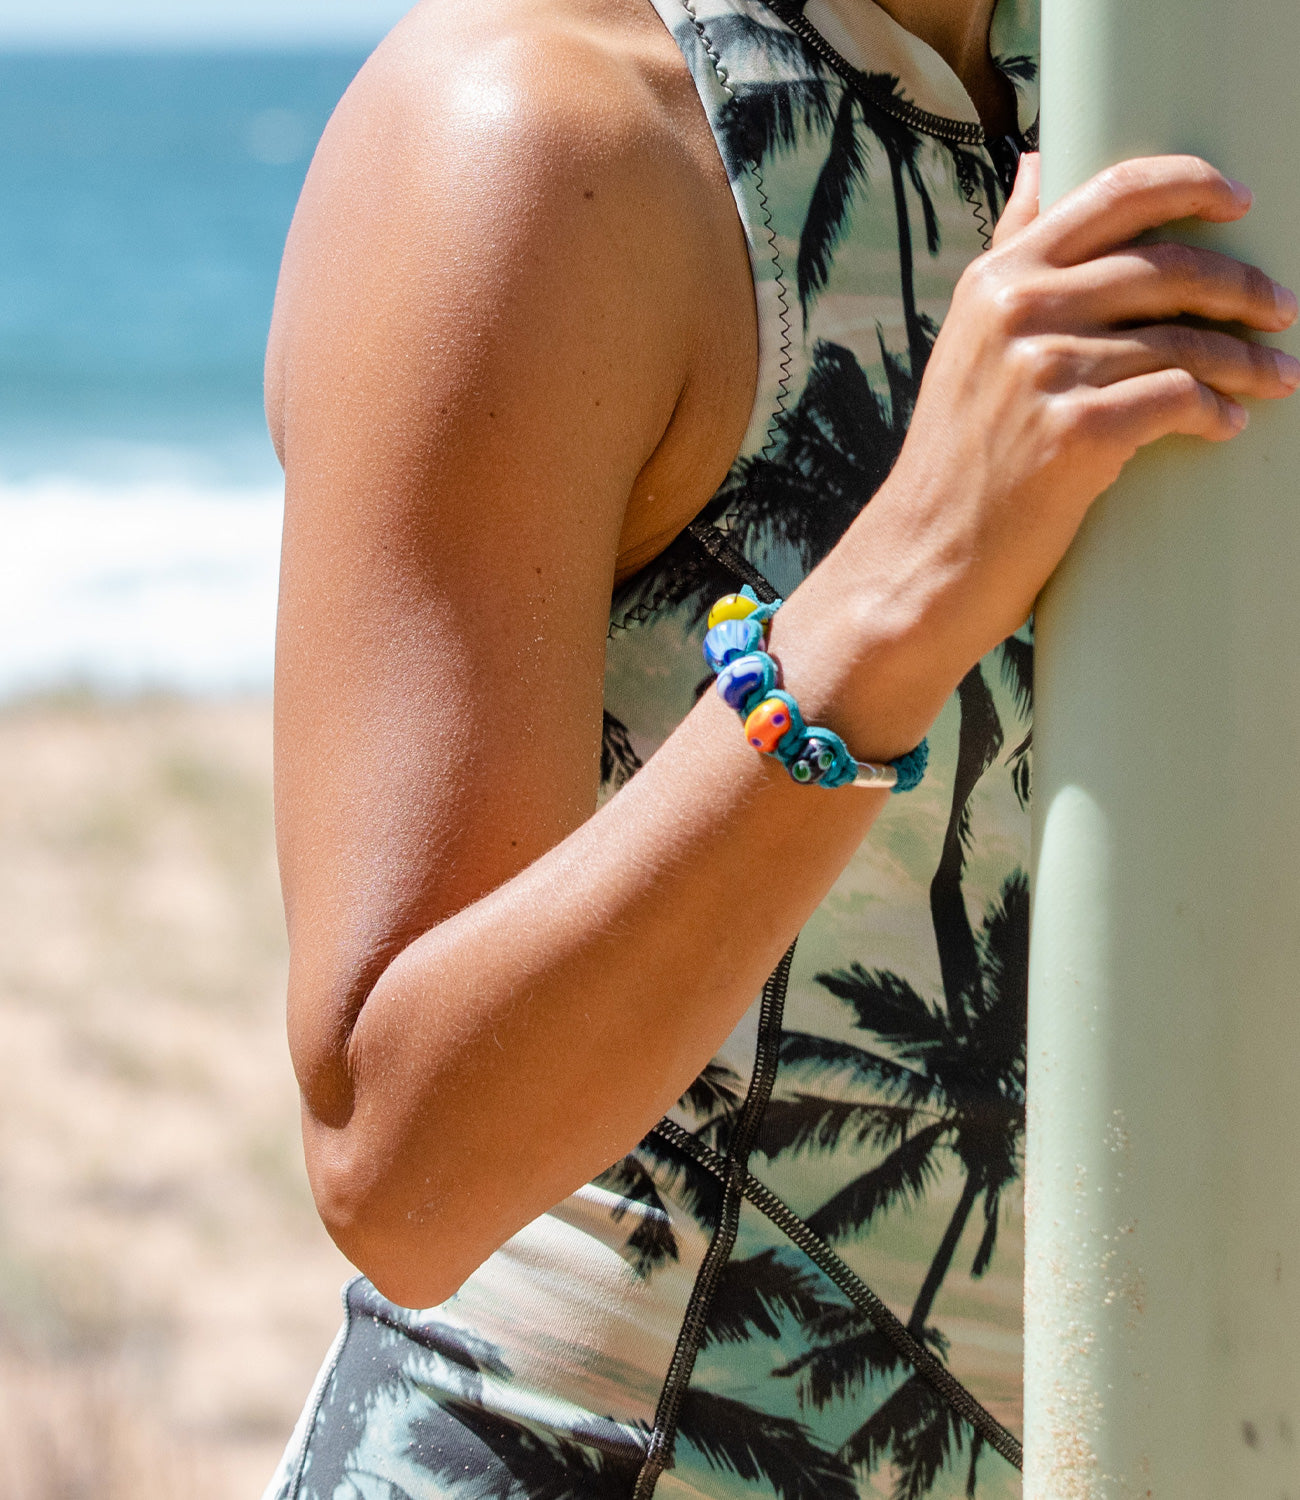 Custom macrame bracelet with colourful glass travel beads in teal cord, worn by surfer on the